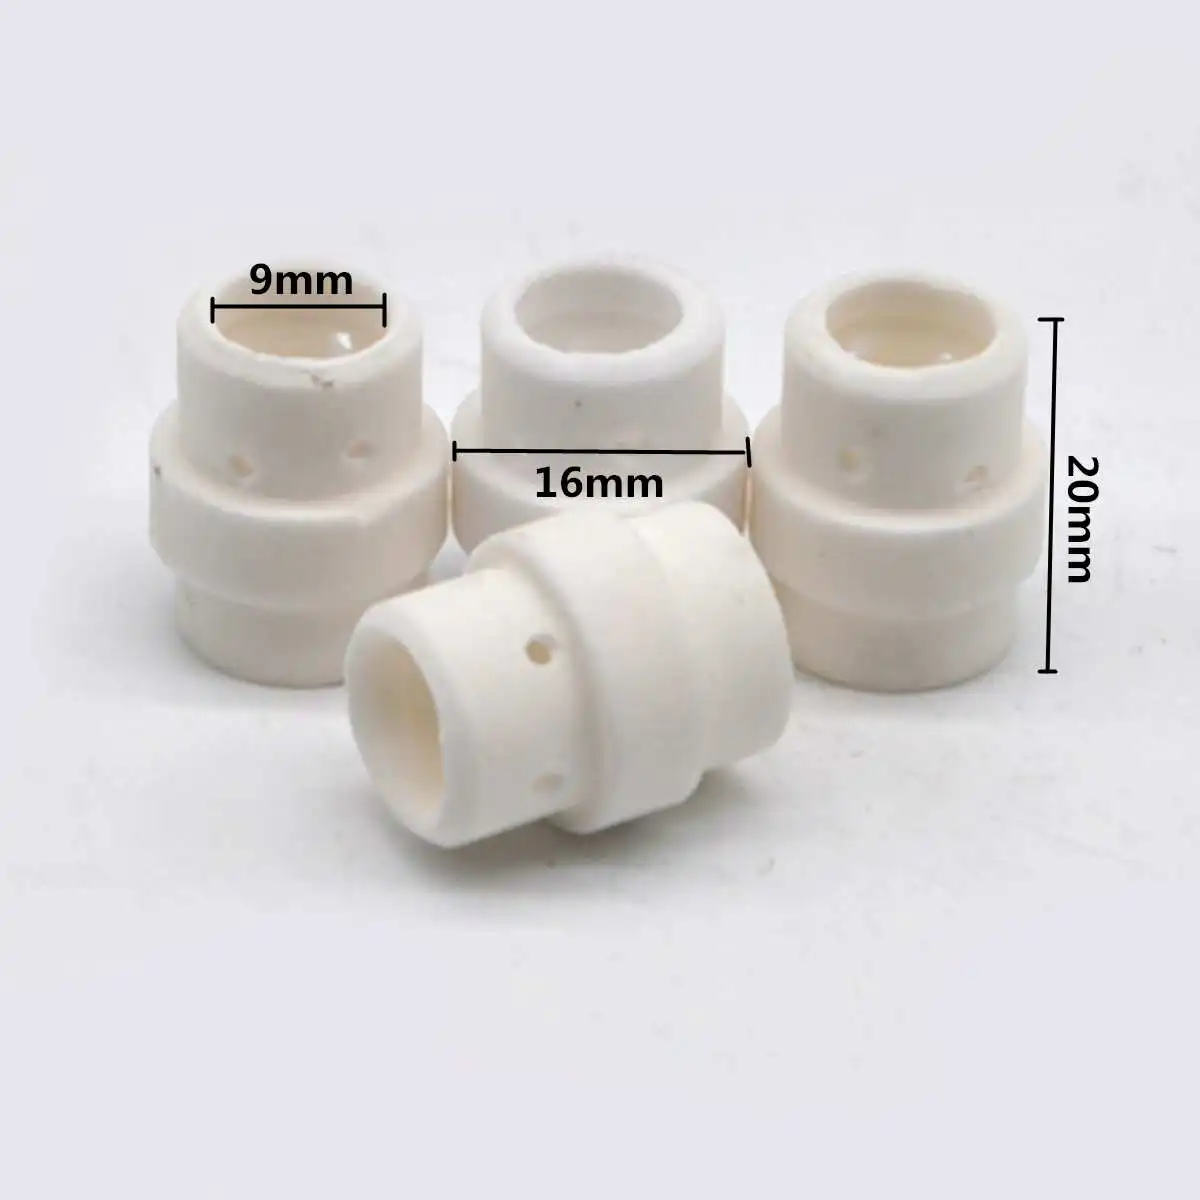 50pcs Ceramic Gas Diffuser Swirl Ring Welding Carving Torch Accoutrement for MB 24 KD MIG MAG Durable 